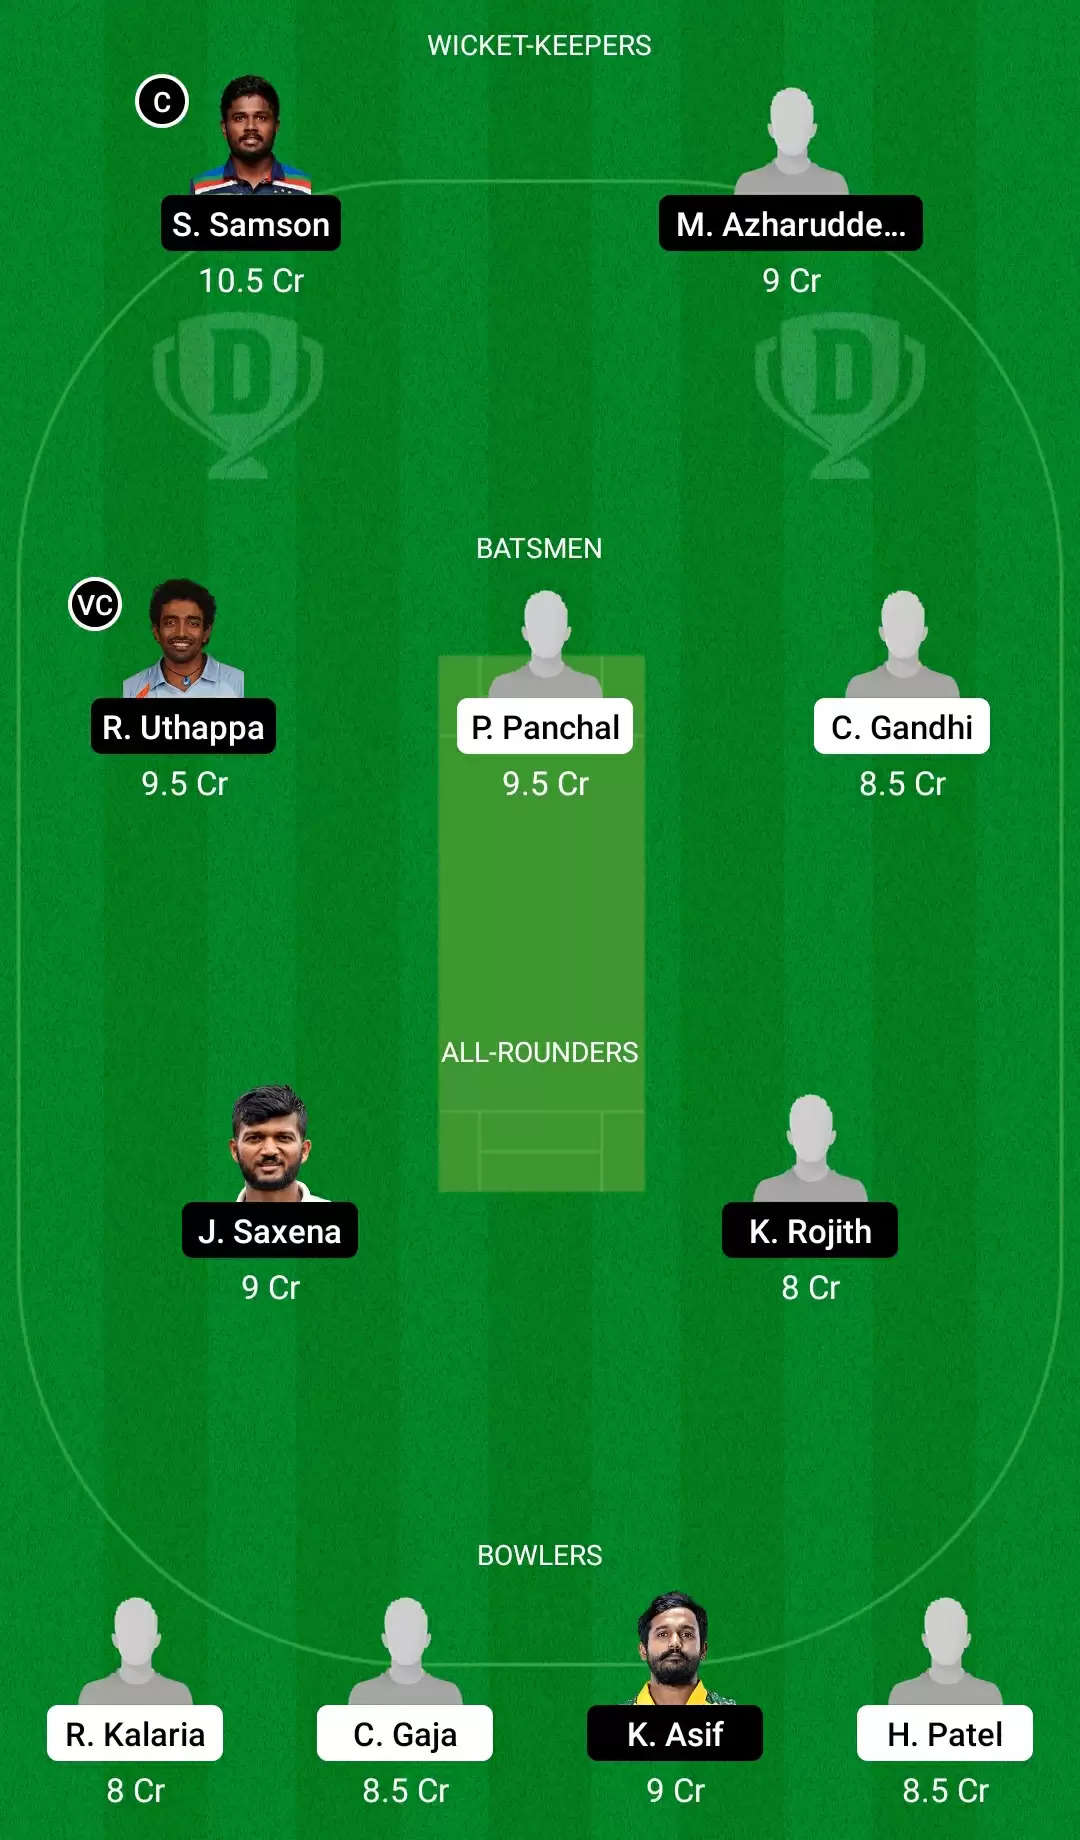 GUJ vs KER Dream11 Prediction for Syed Mushtaq Ali Trophy 2021/22: Playing XI, Fantasy Cricket Tips, Team, Weather Updates and Pitch Report